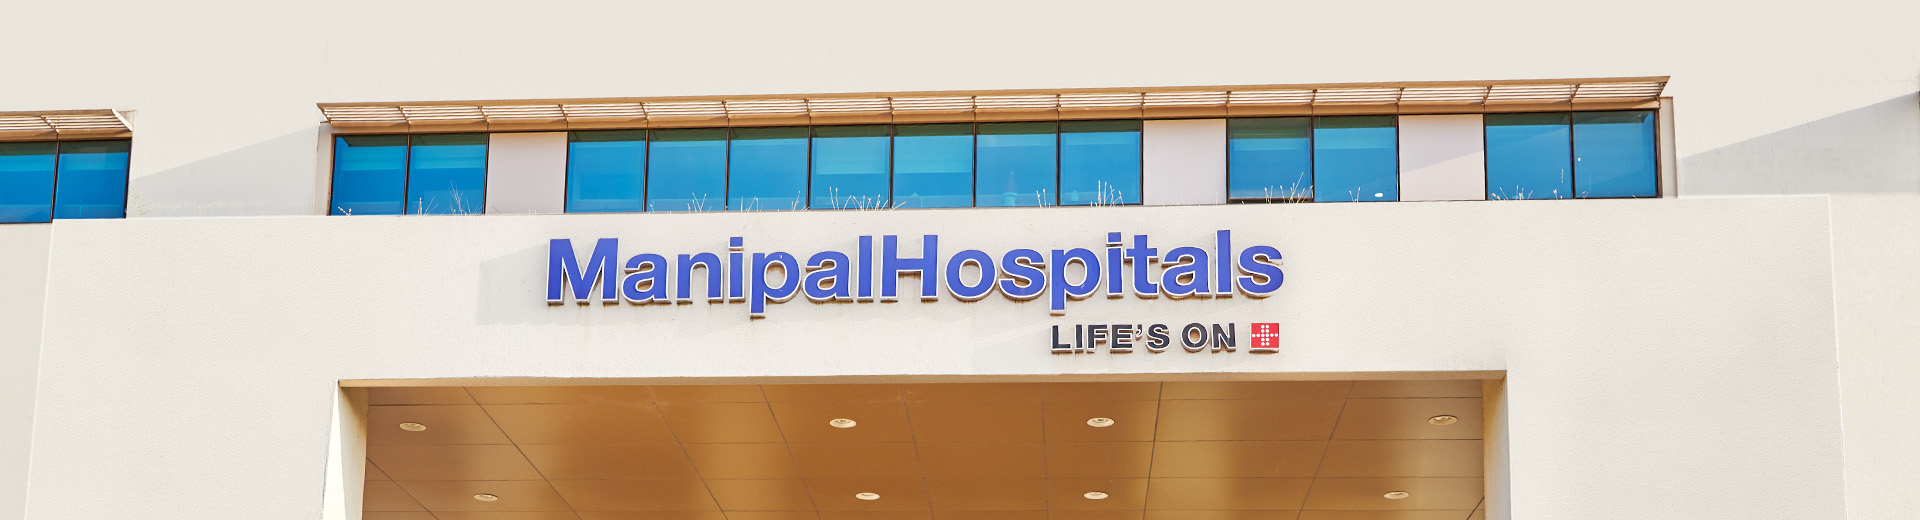 Terms and Conditions of Manipal Hospitals Baner, Pune - Manipal Hospitals 